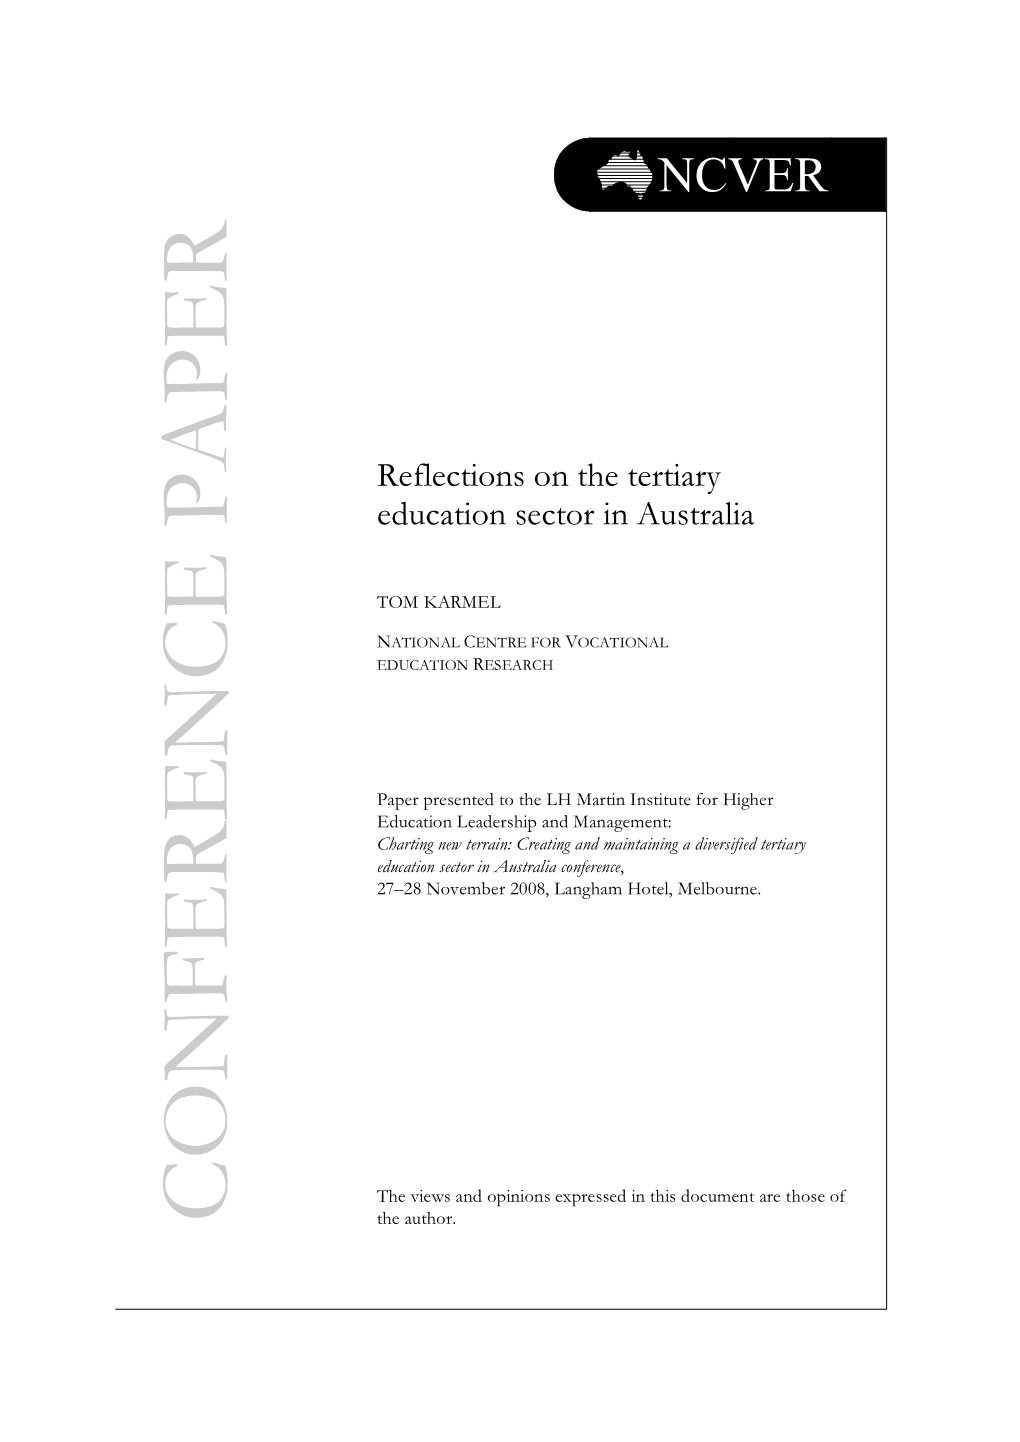 Reflections on the Tertiary Education Sector in Australia